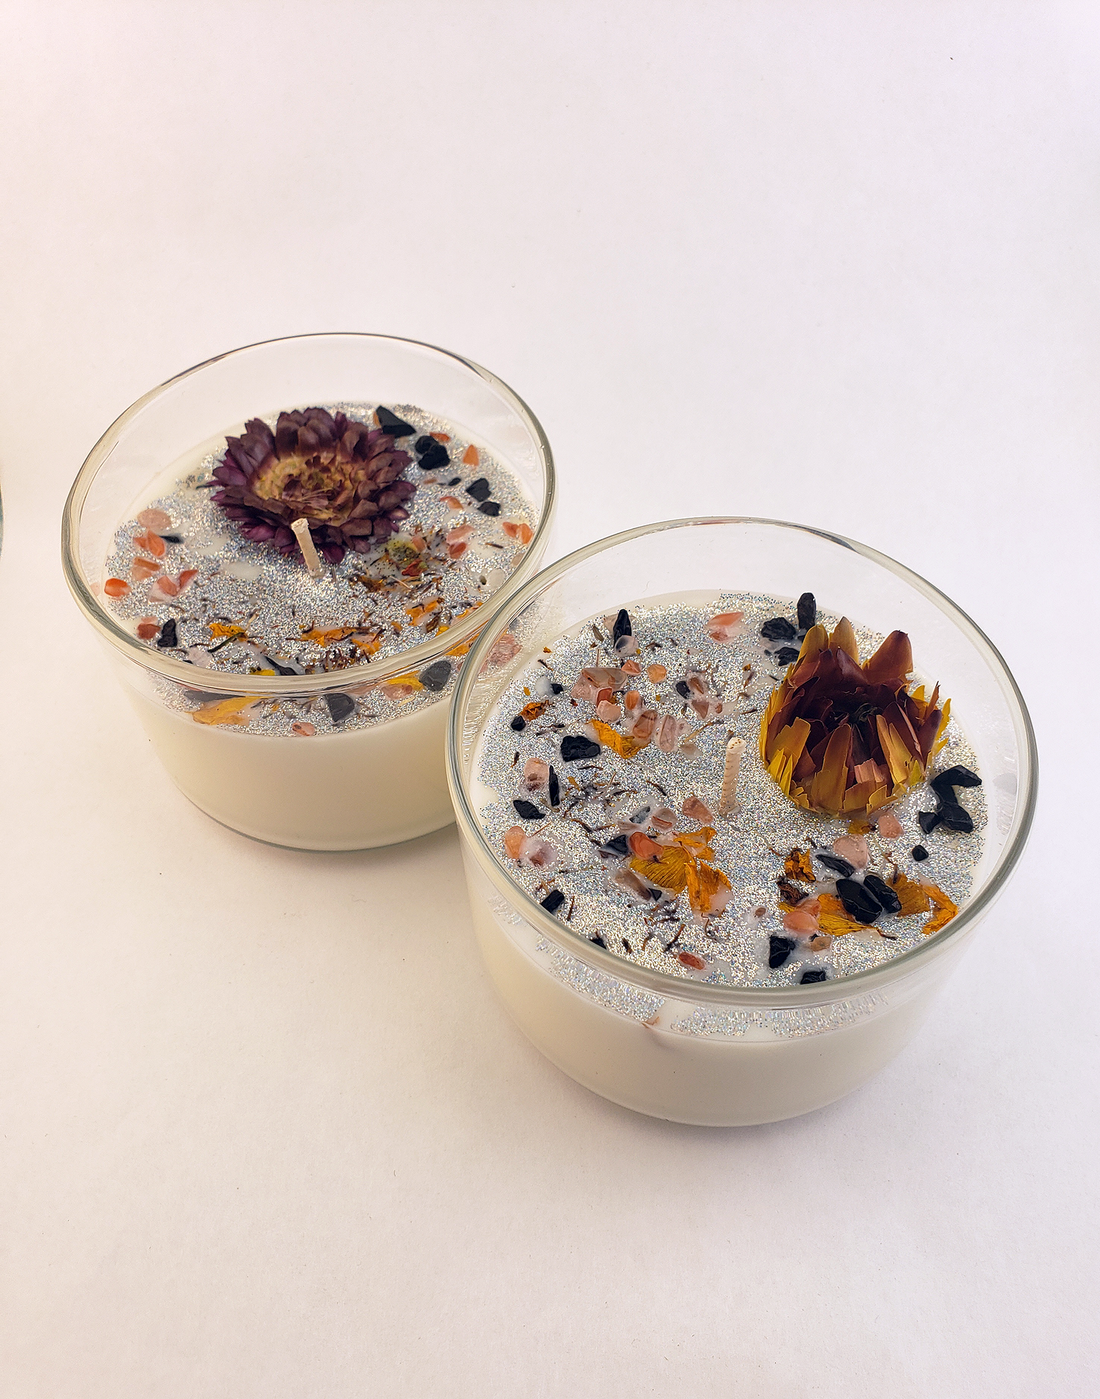 Best Friend - Coconut Soy Wax Handmade Scented Tumbler Candle - Scented with Essential Oils - Decorated with Dried Herbs Crystal Chips Candle Safe Glitter - Everlasting Flower Black Tourmaline Agate Kunlun Snow Chrysanthemum